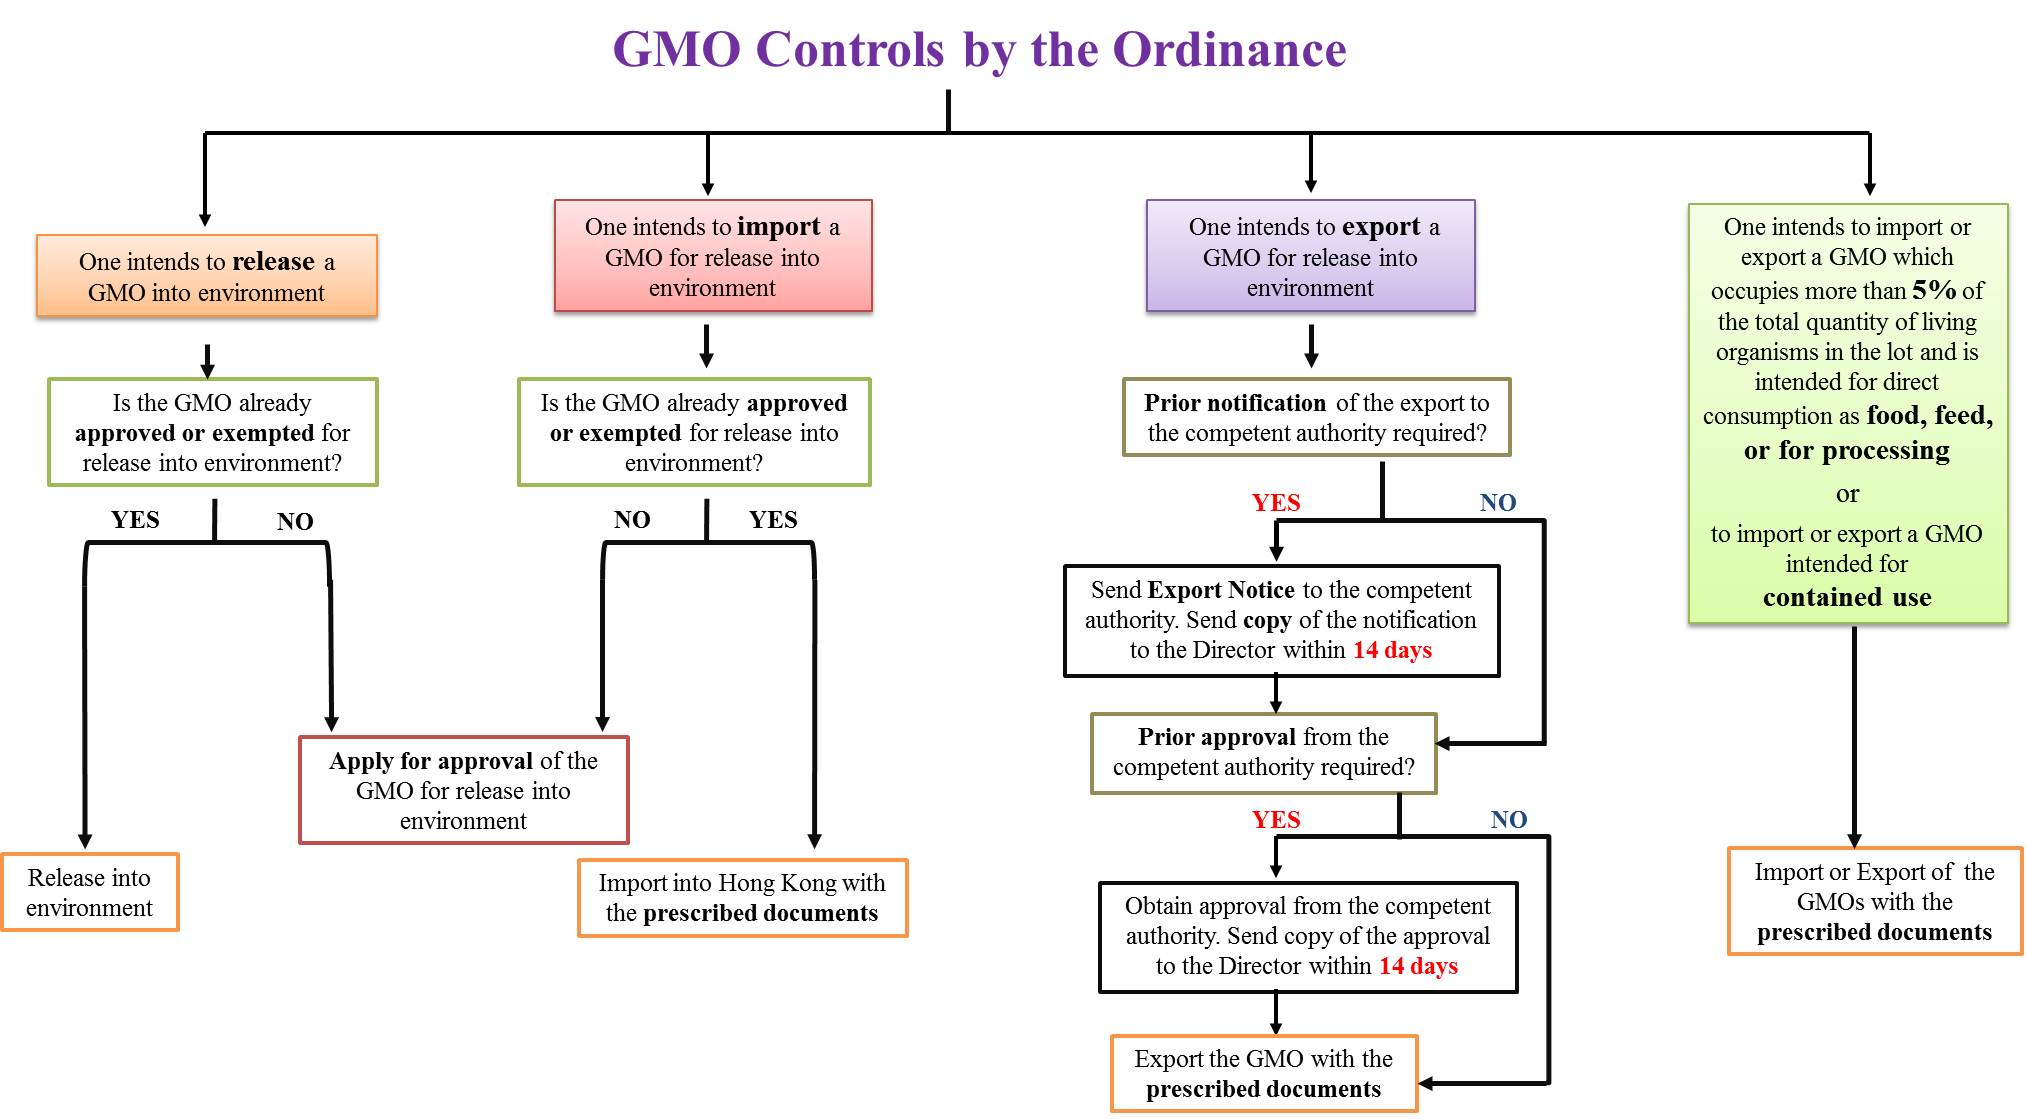 A flow chart summarised the controls on GMOs under the Ordinance